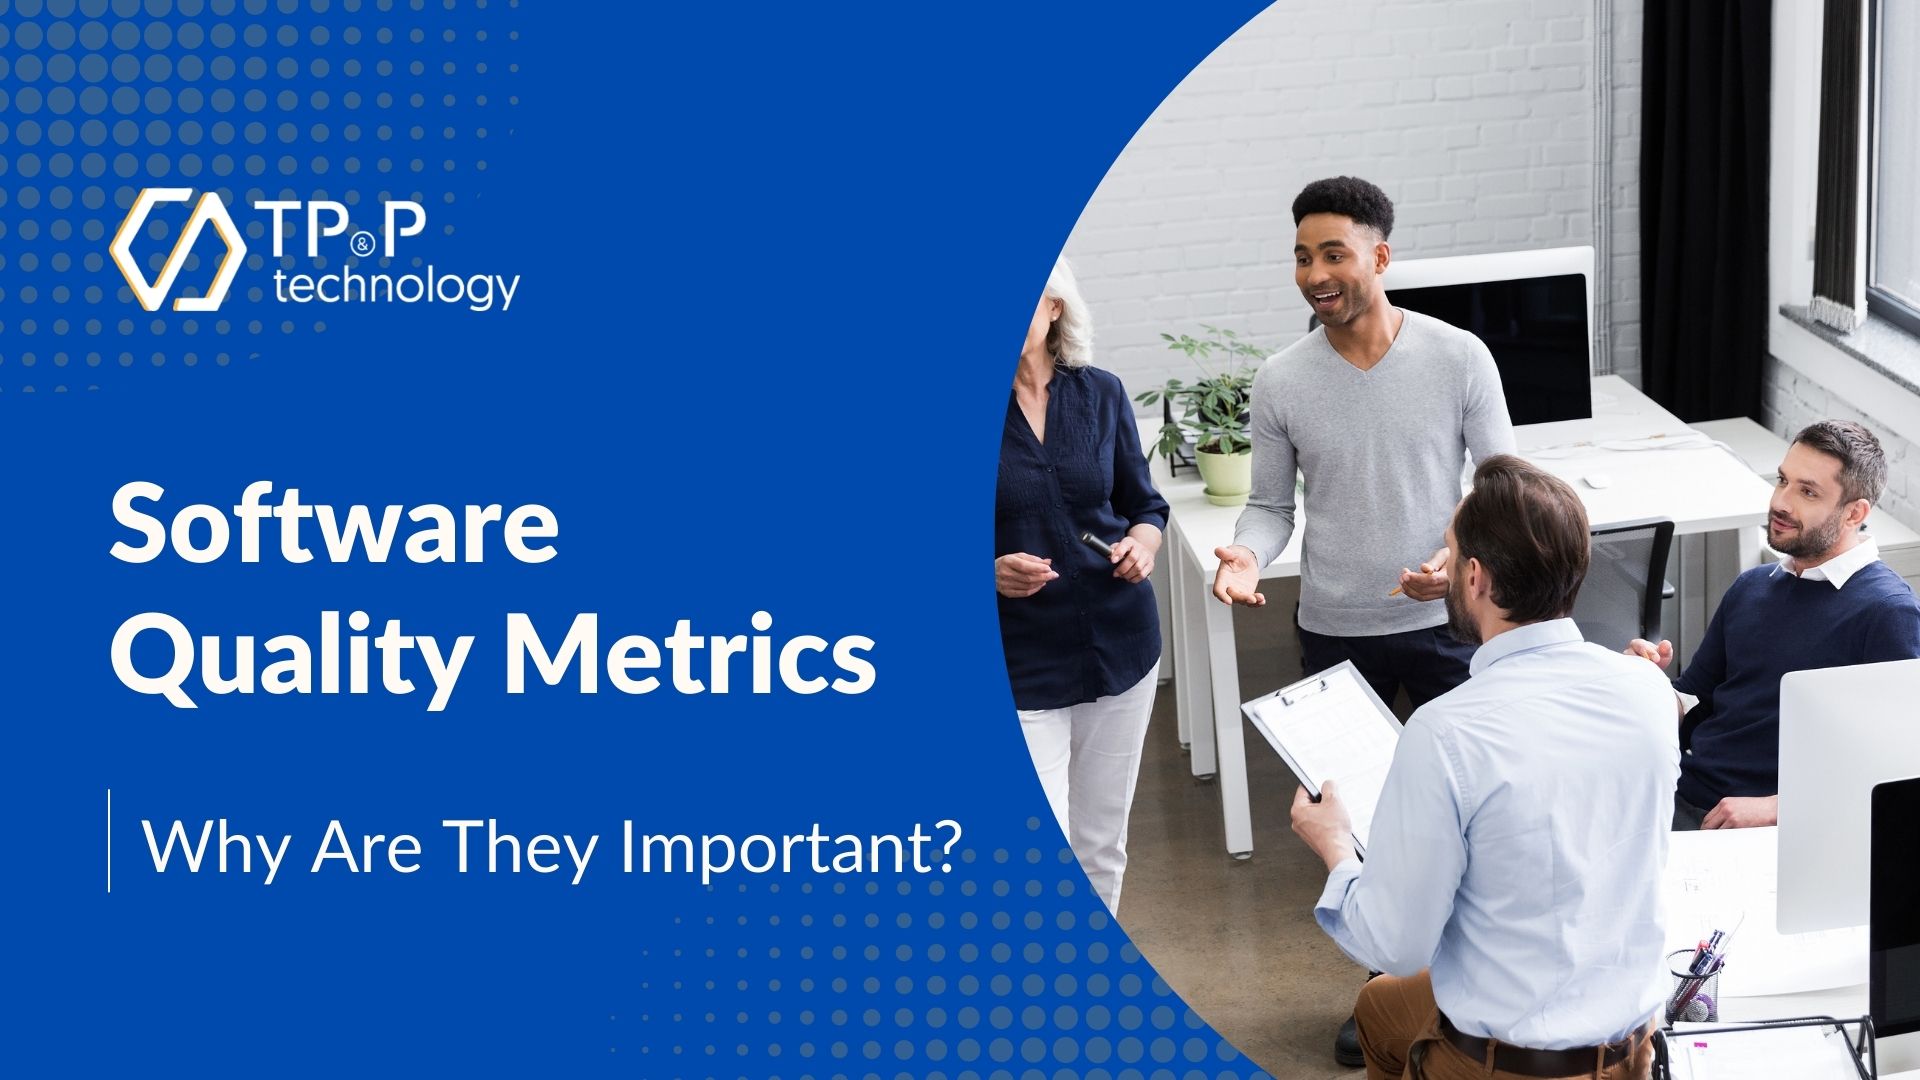 Software Development Quality Metrics: Why are They Important?